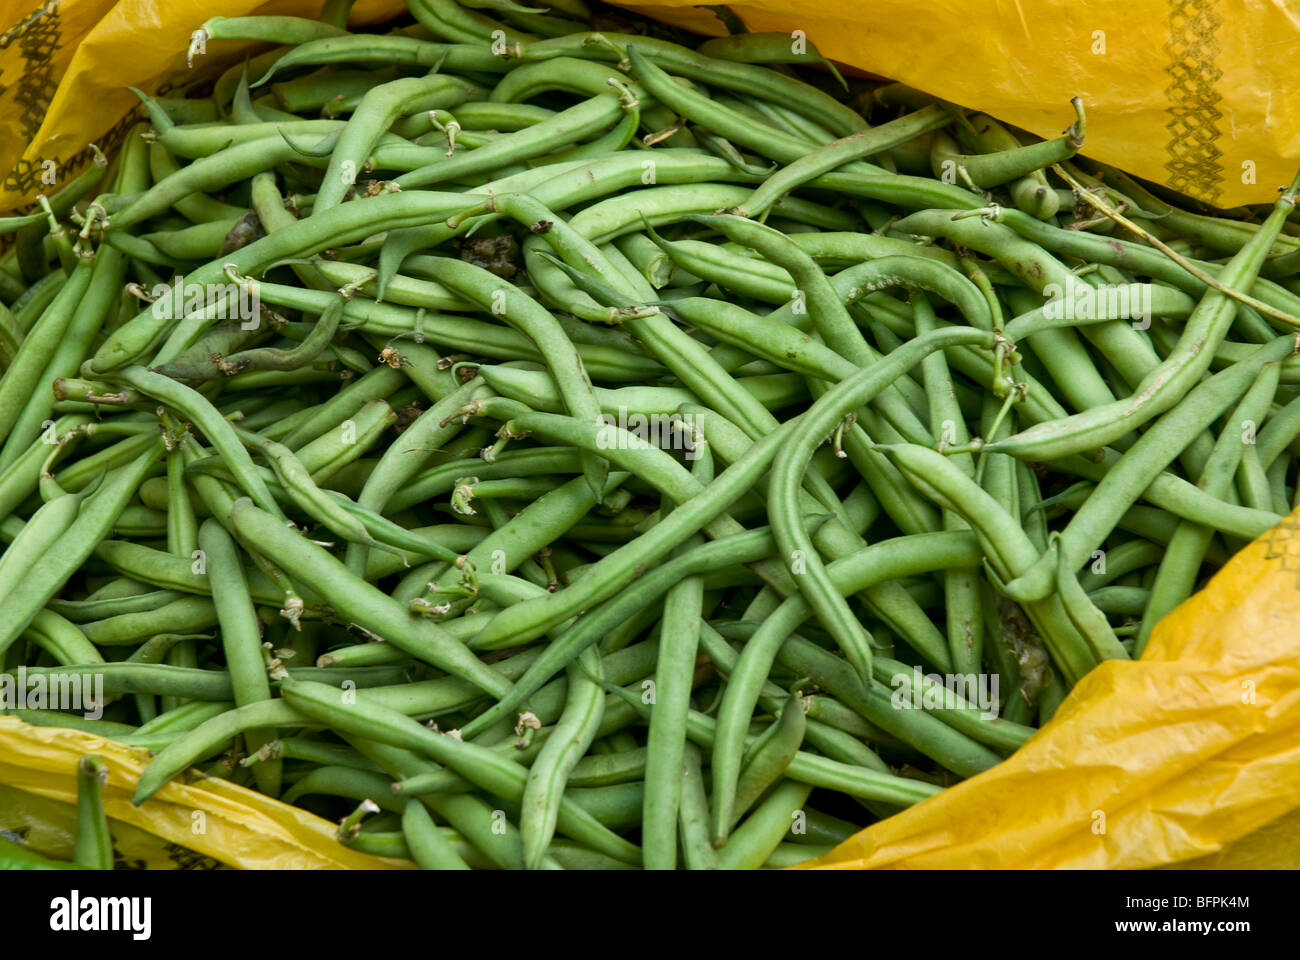 Download Green Beans In A Yellow Plastic Bag For Sale In An Ethiopian Market Stock Photo Alamy Yellowimages Mockups